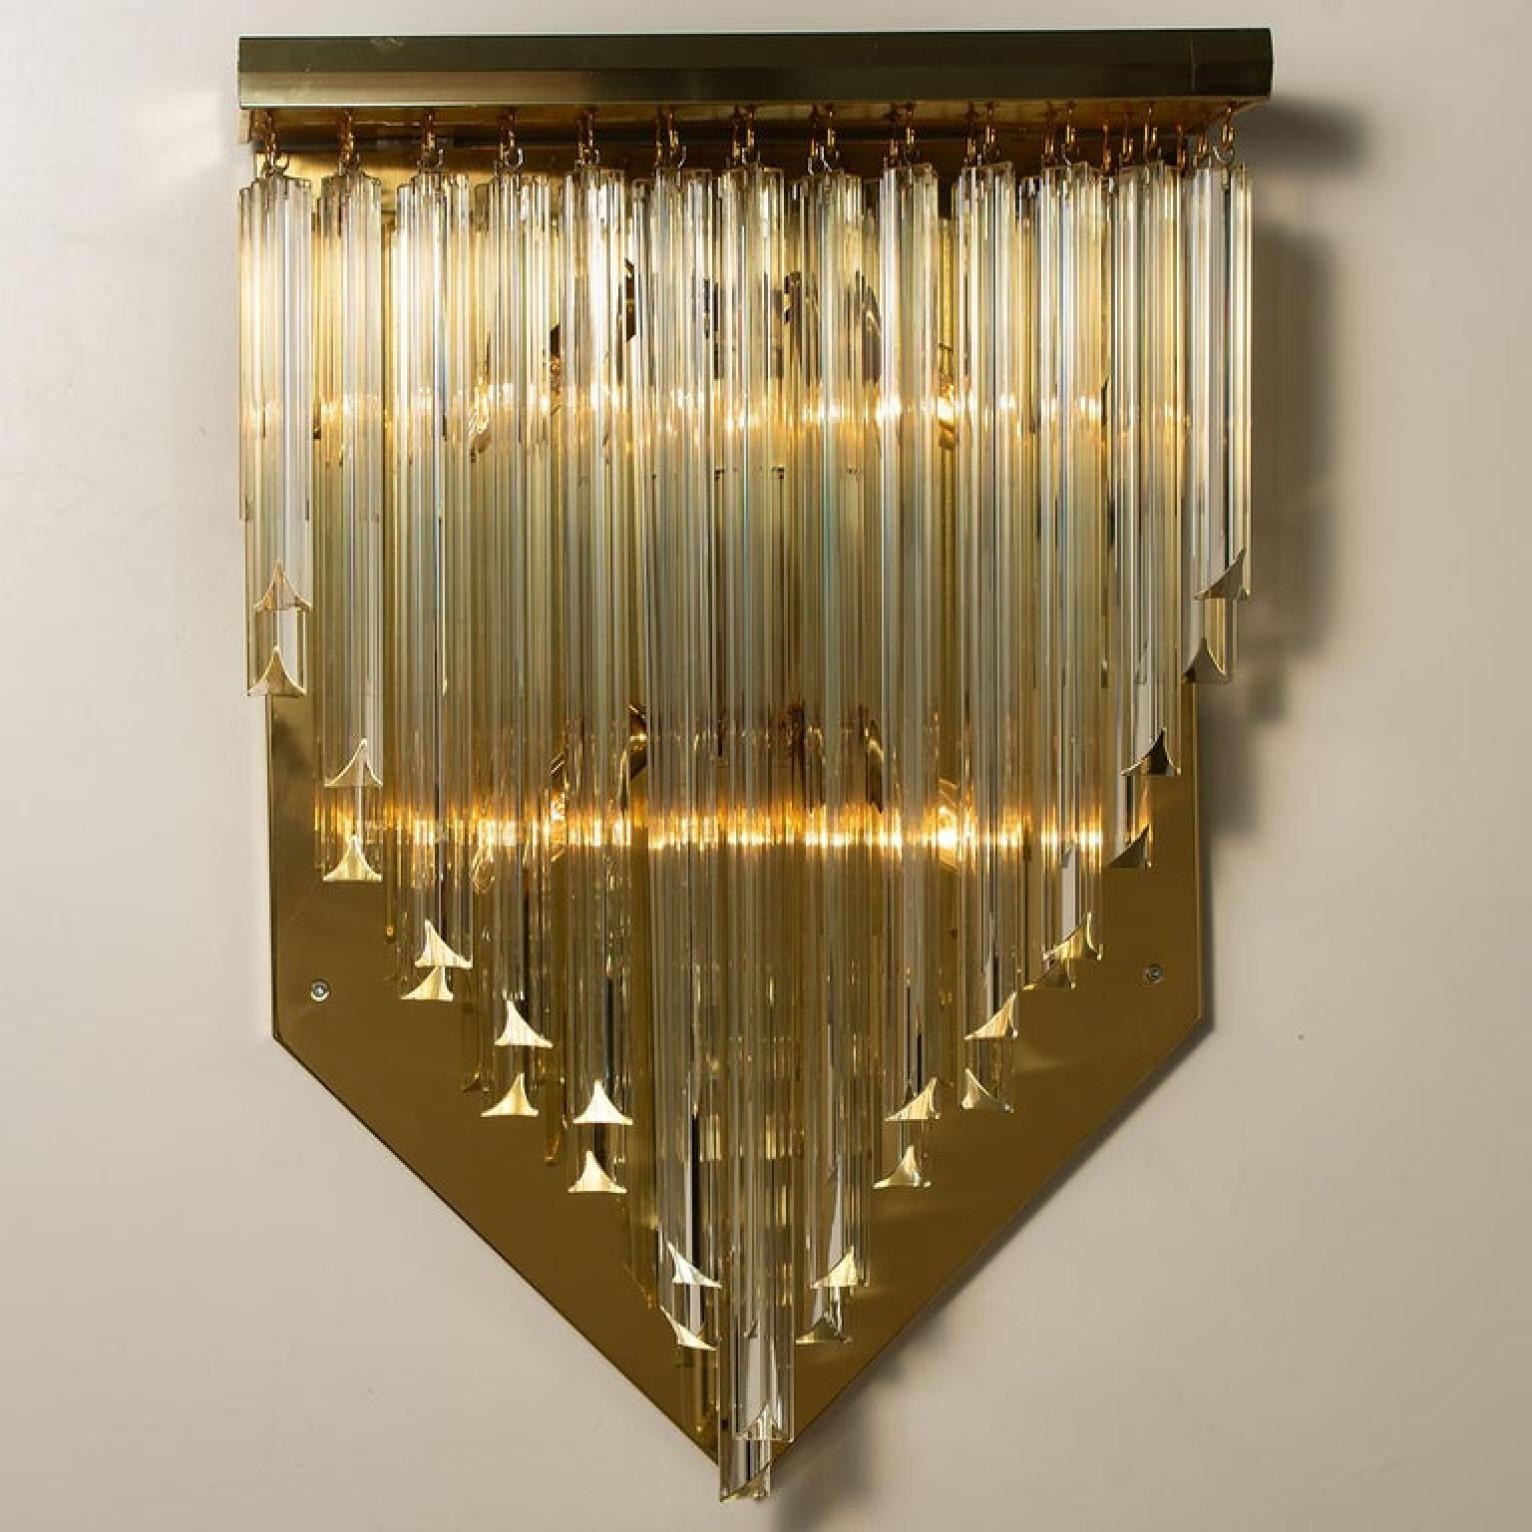 1 of the 6 XXL 'H29.9' Venini Style Murano Glass and Gilt Brass Sconces, 1960s For Sale 5